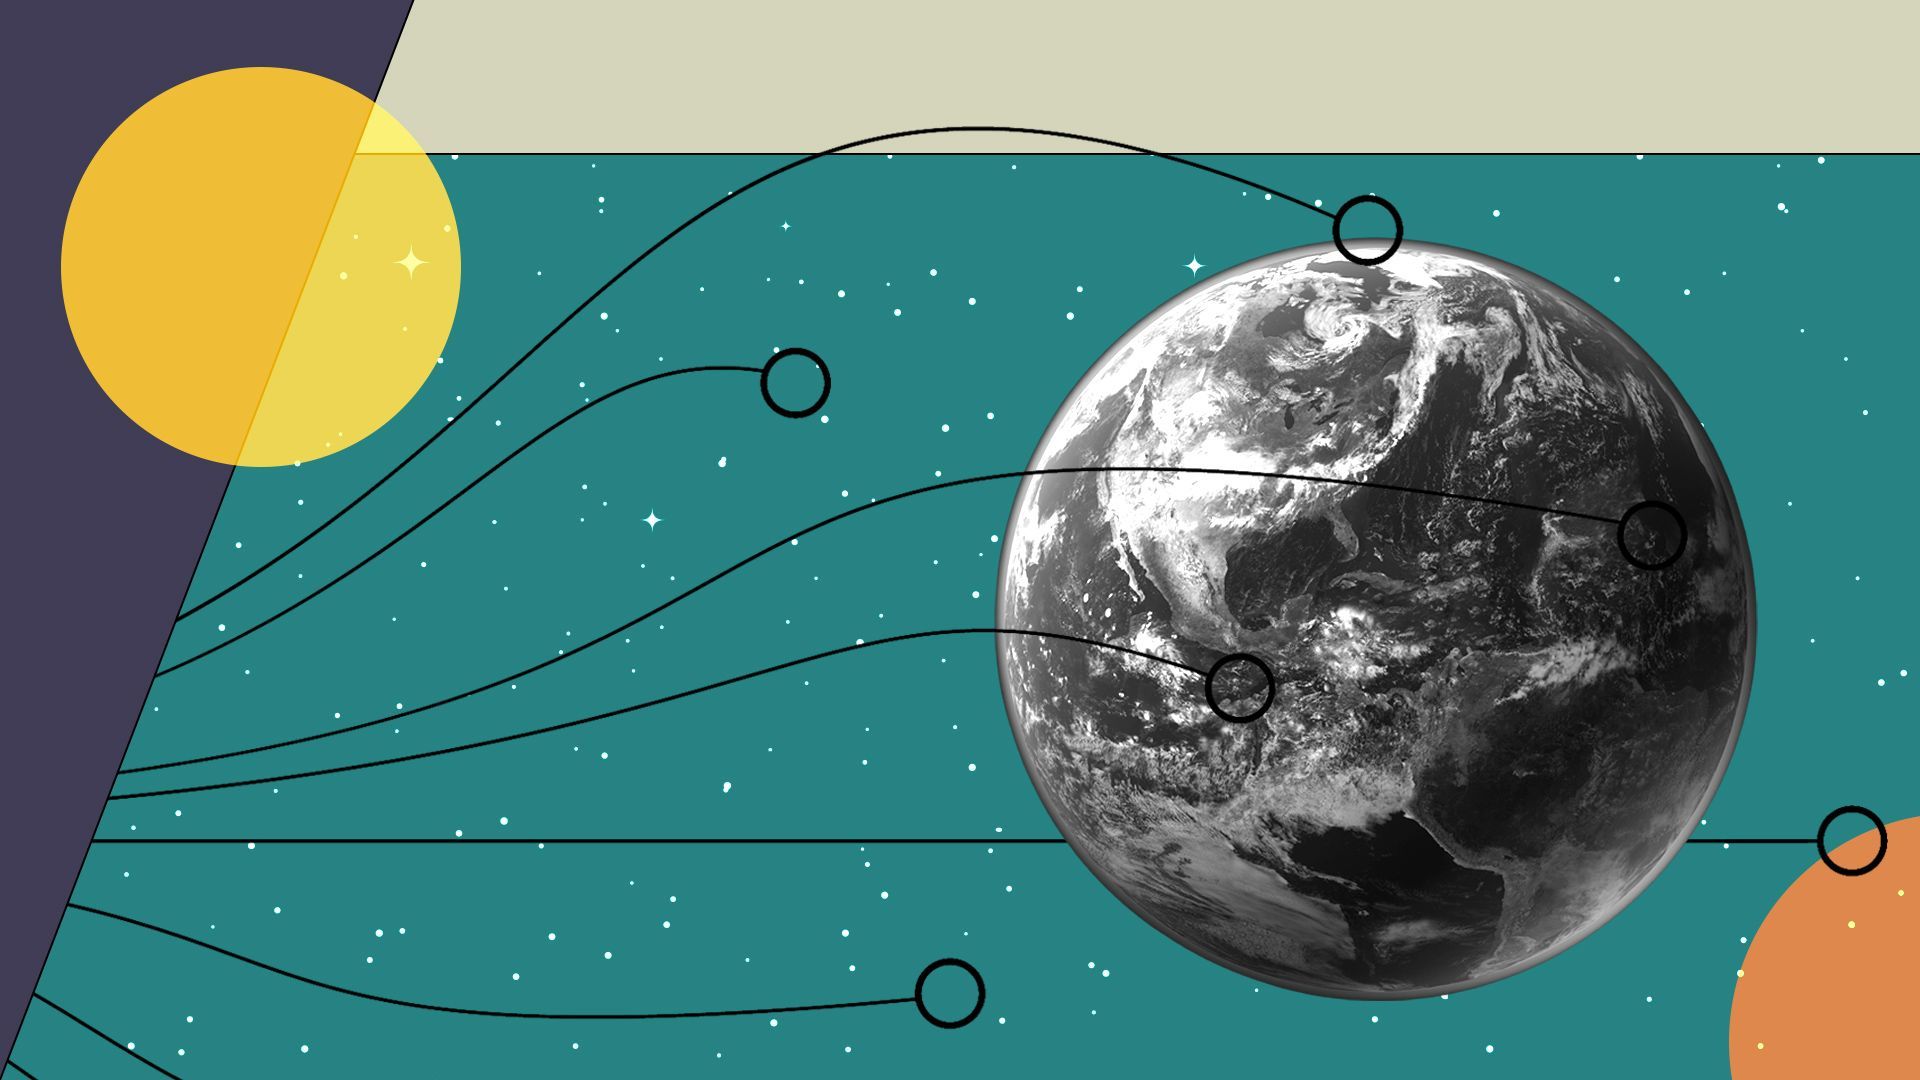 Illustration of a the earth being targeted by wavy lines surrounded by a starry sky.